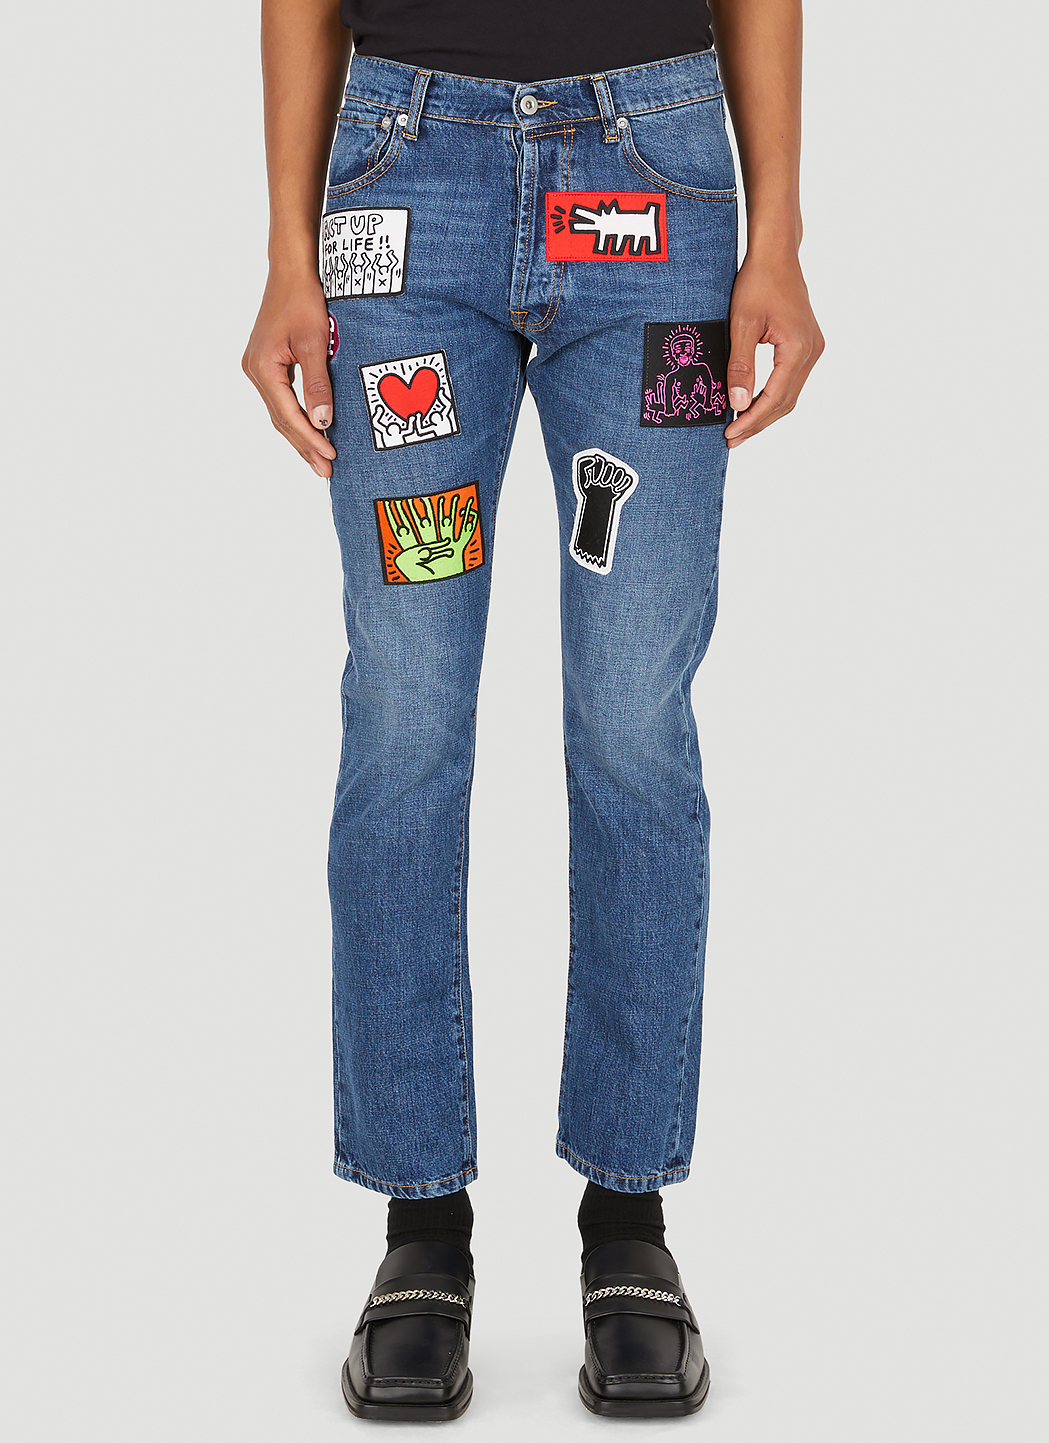 x Keith Haring Jeans